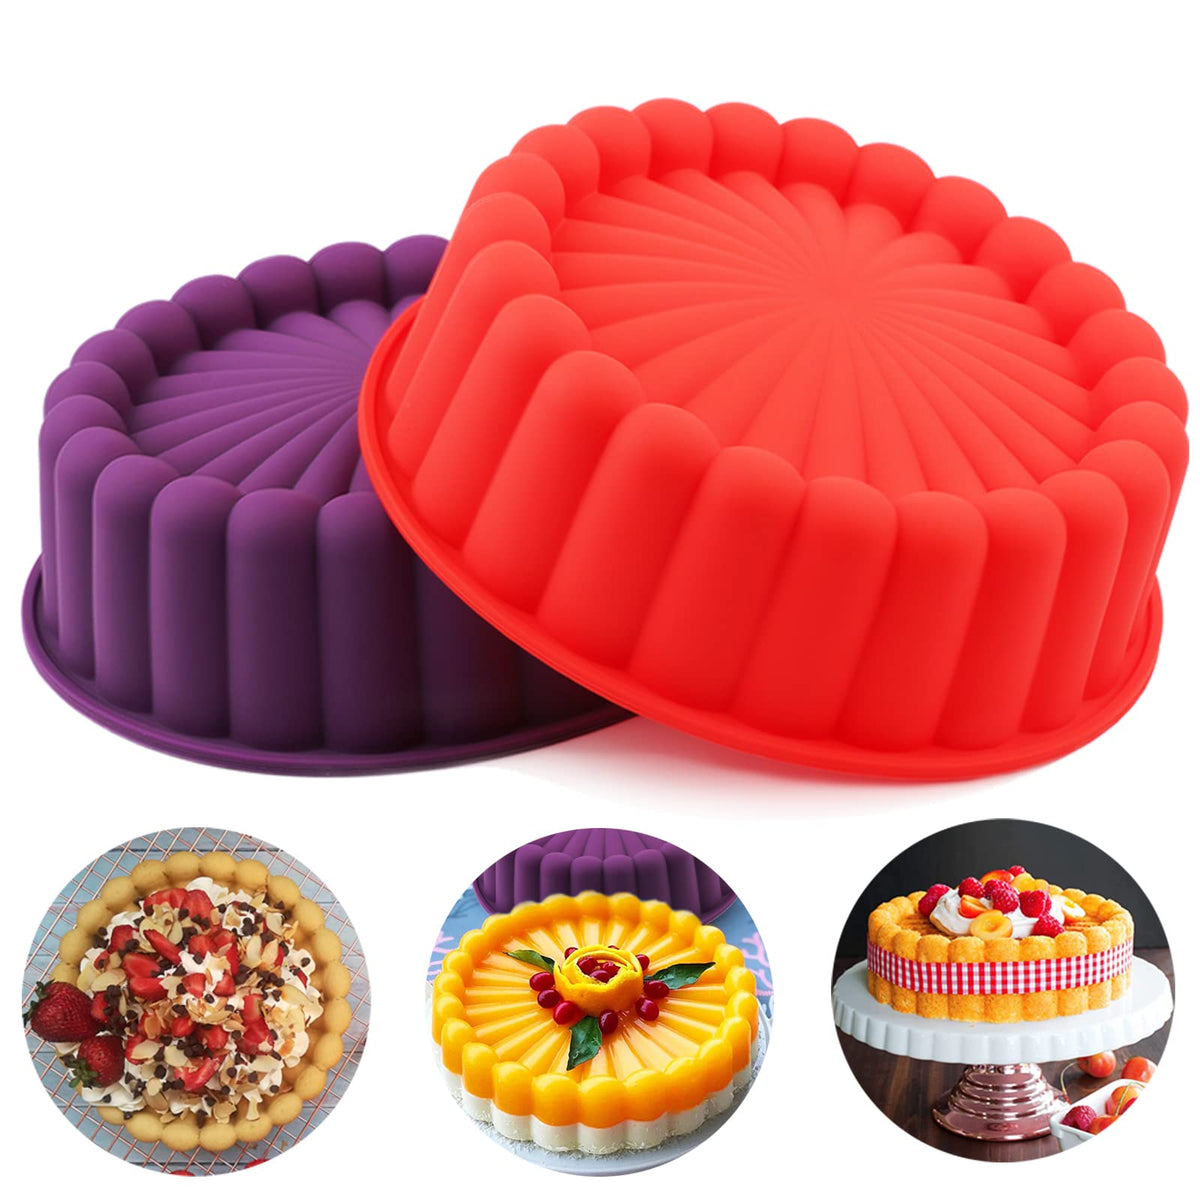 8 inch Round Cake Pans(2 Pack) - Nonstick Silicone Cake Molds for Layer  Cake, Cheese Cake and Chocolate Cake - Deep Red